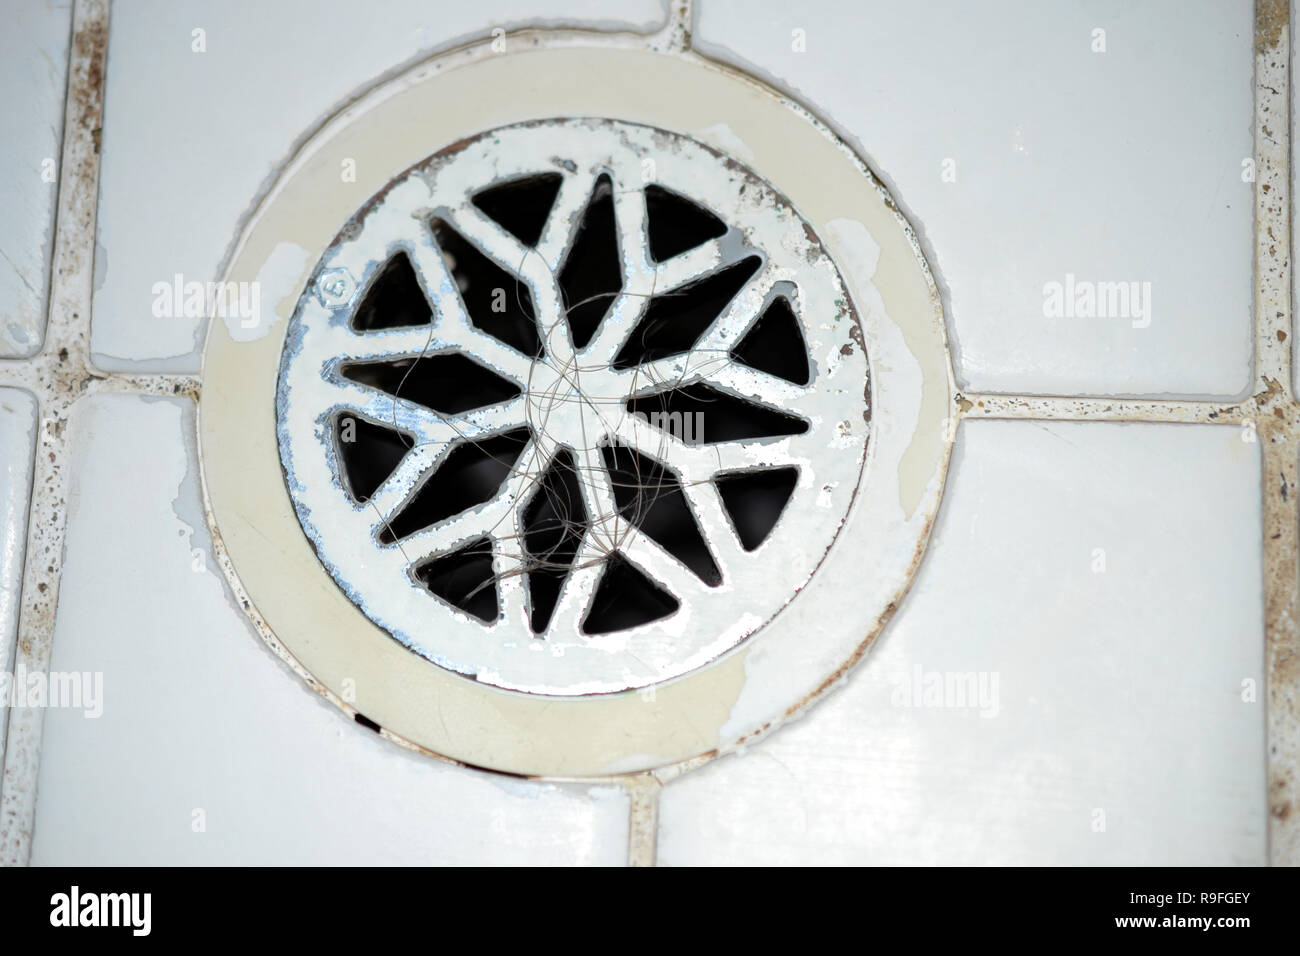 shower tiles with mold and hairs in drain Stock Photo